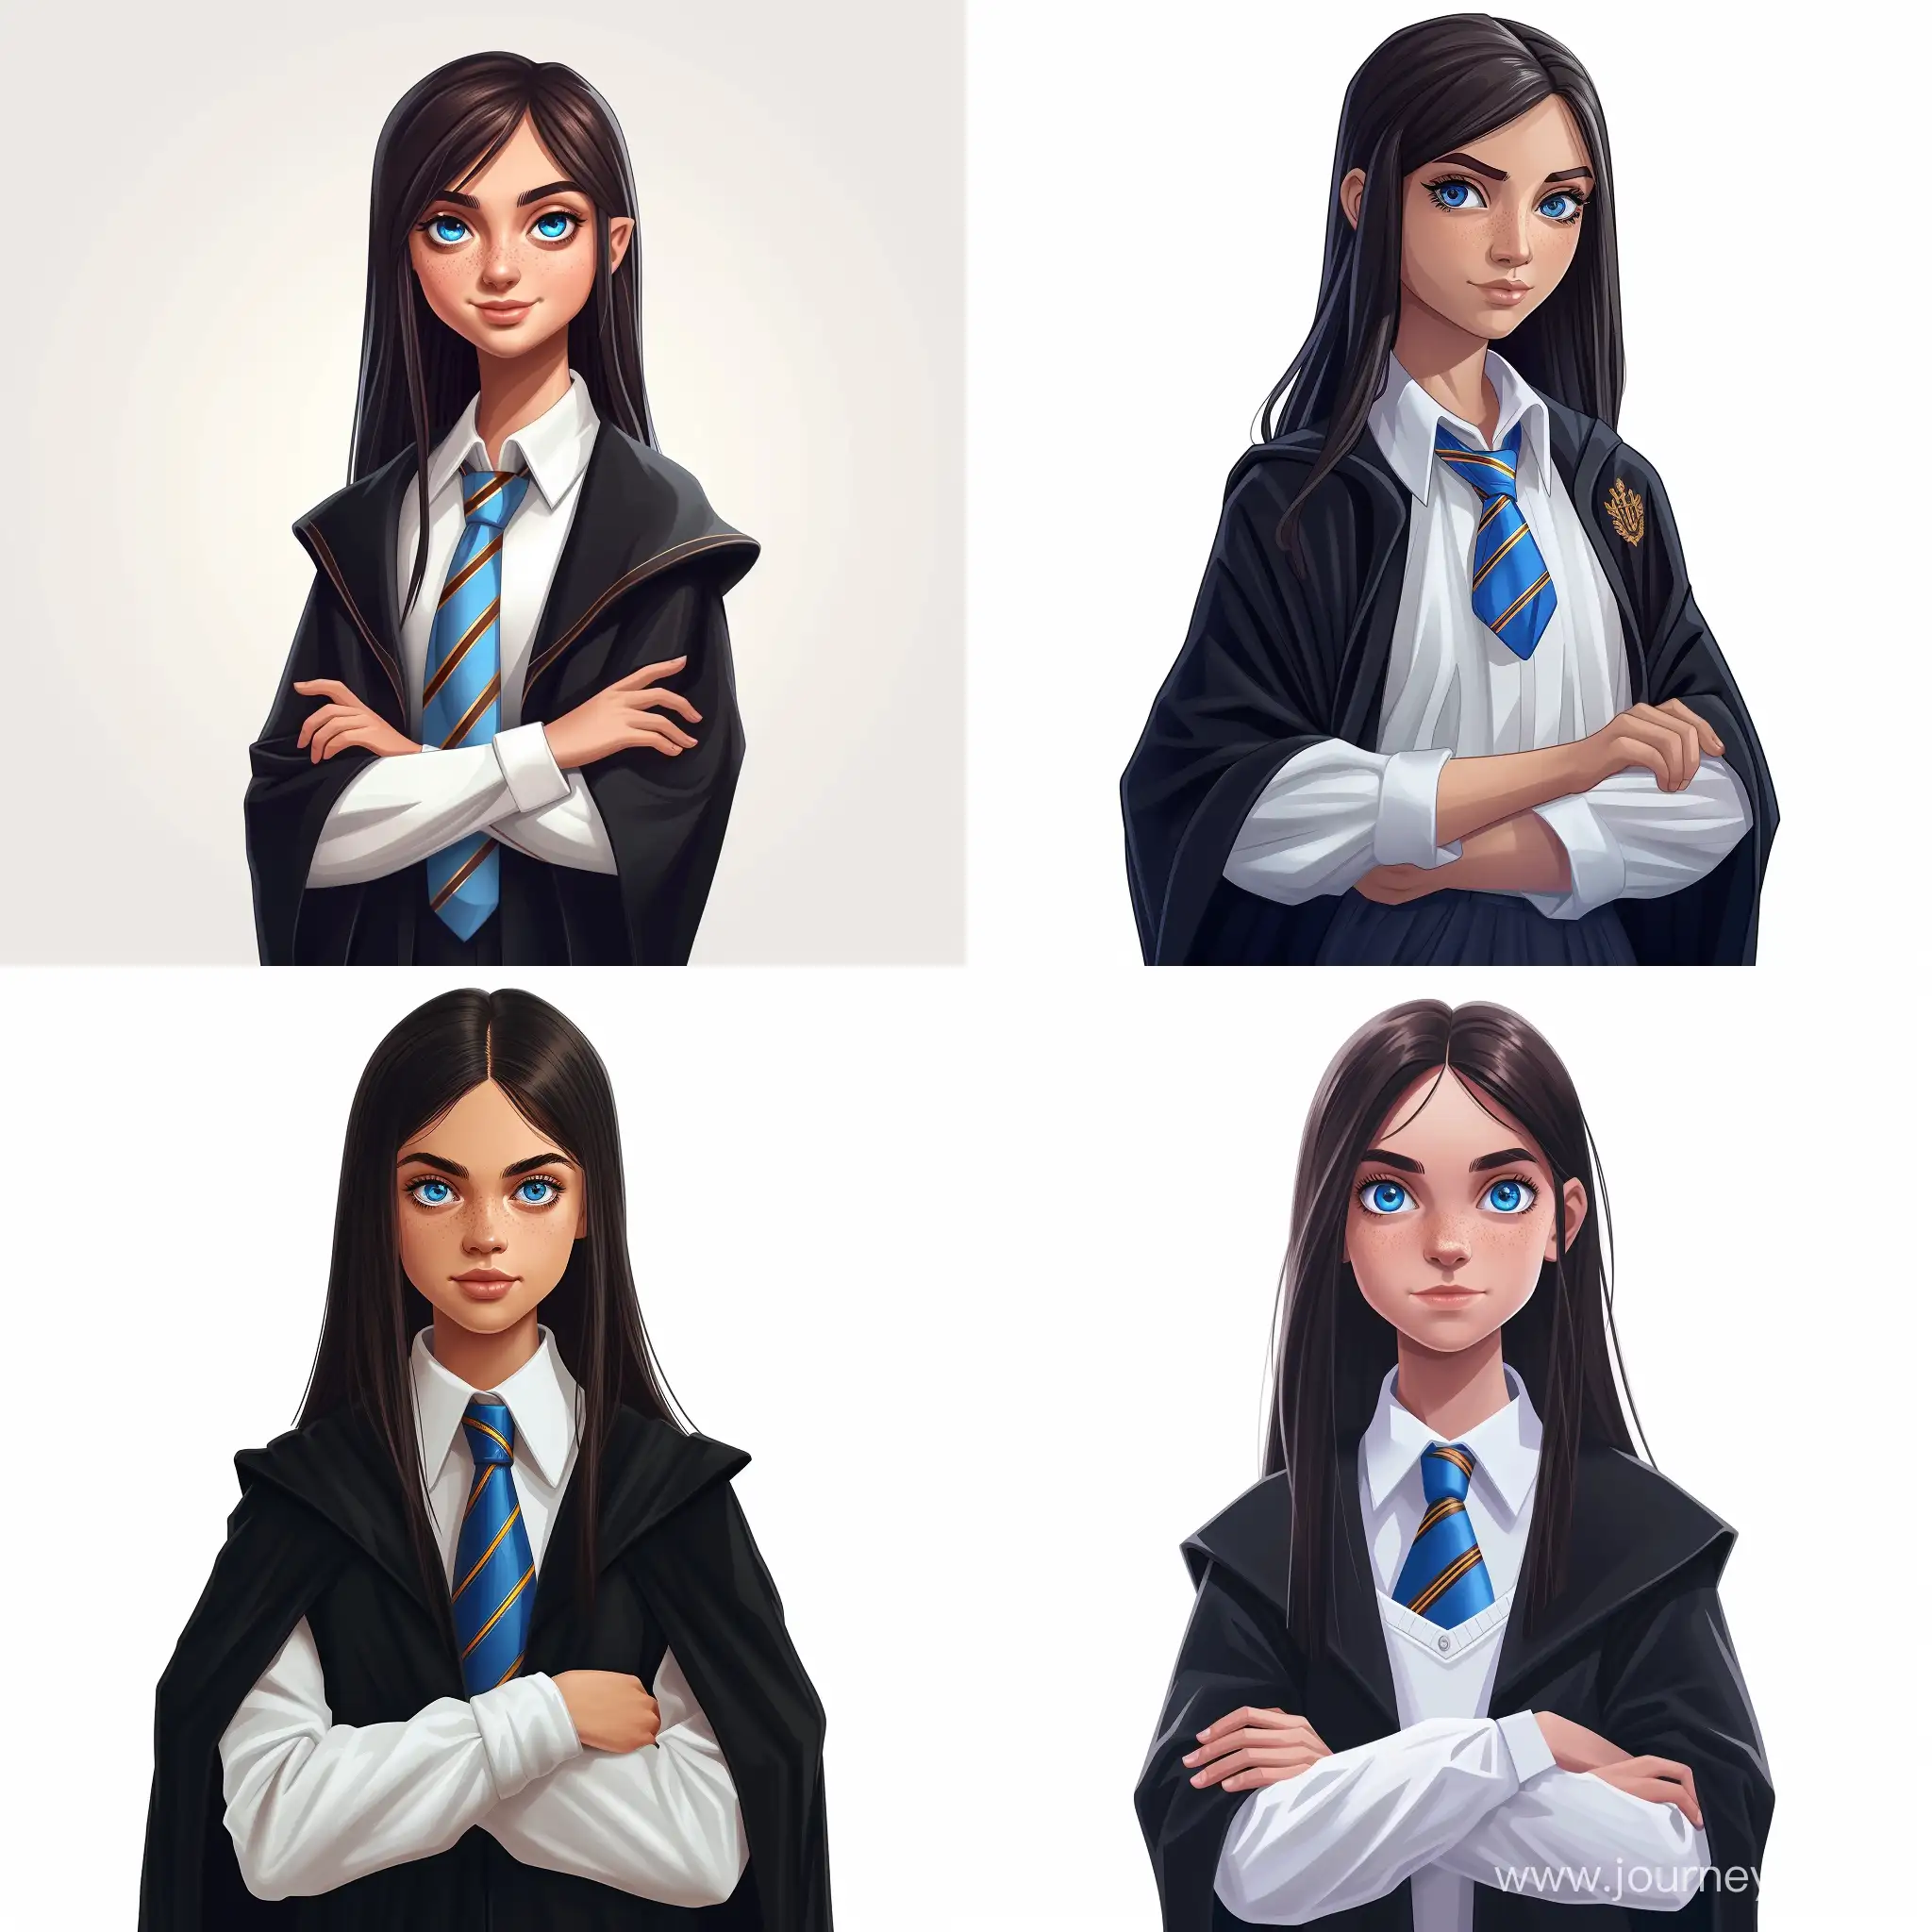 Beautiful girl, straight dark hair, blue eyes, white skin, teenager, 15 years old, Harry Potter fandom, Hogwarts, Ravenclaw uniform, white blouse, blue tie with bronze stripes, black robe, standing with folded arms, high quality, high detail, cartoon art